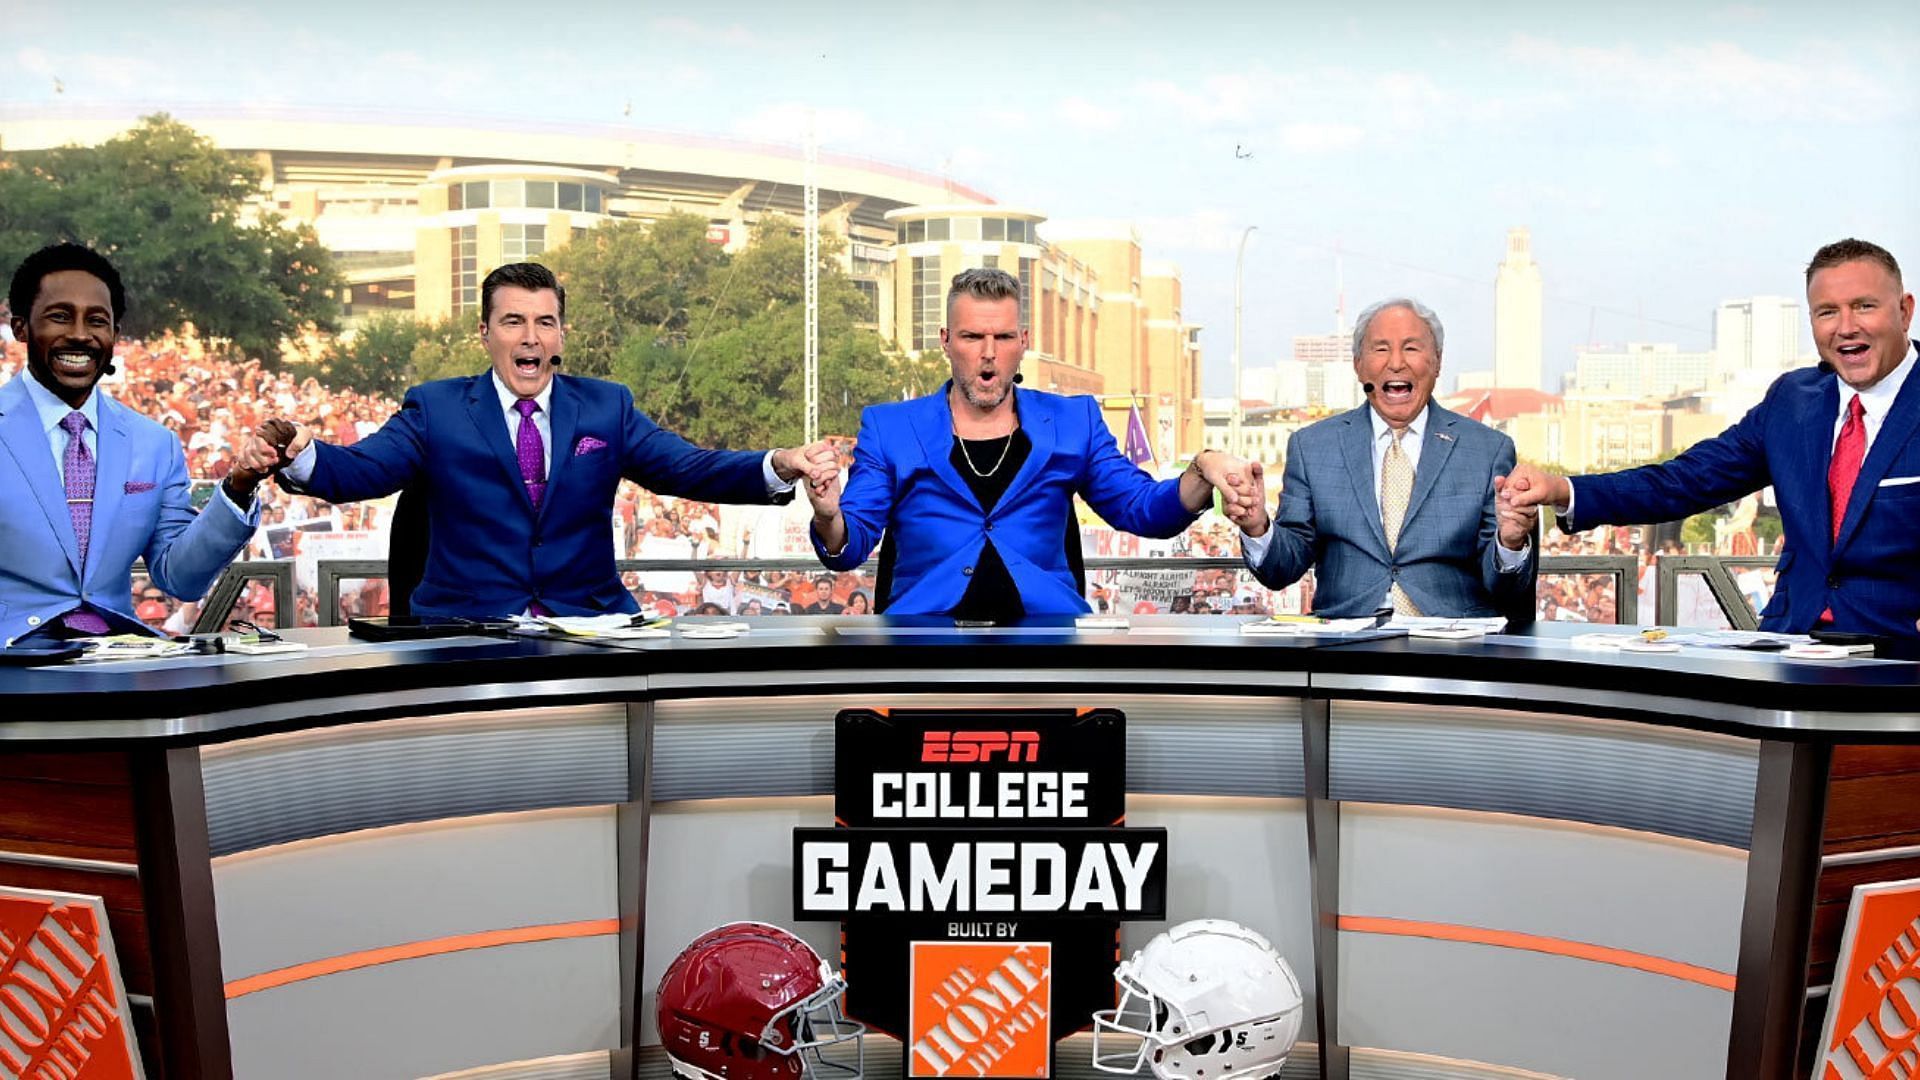 The College GameDay crew is ready for another week of action